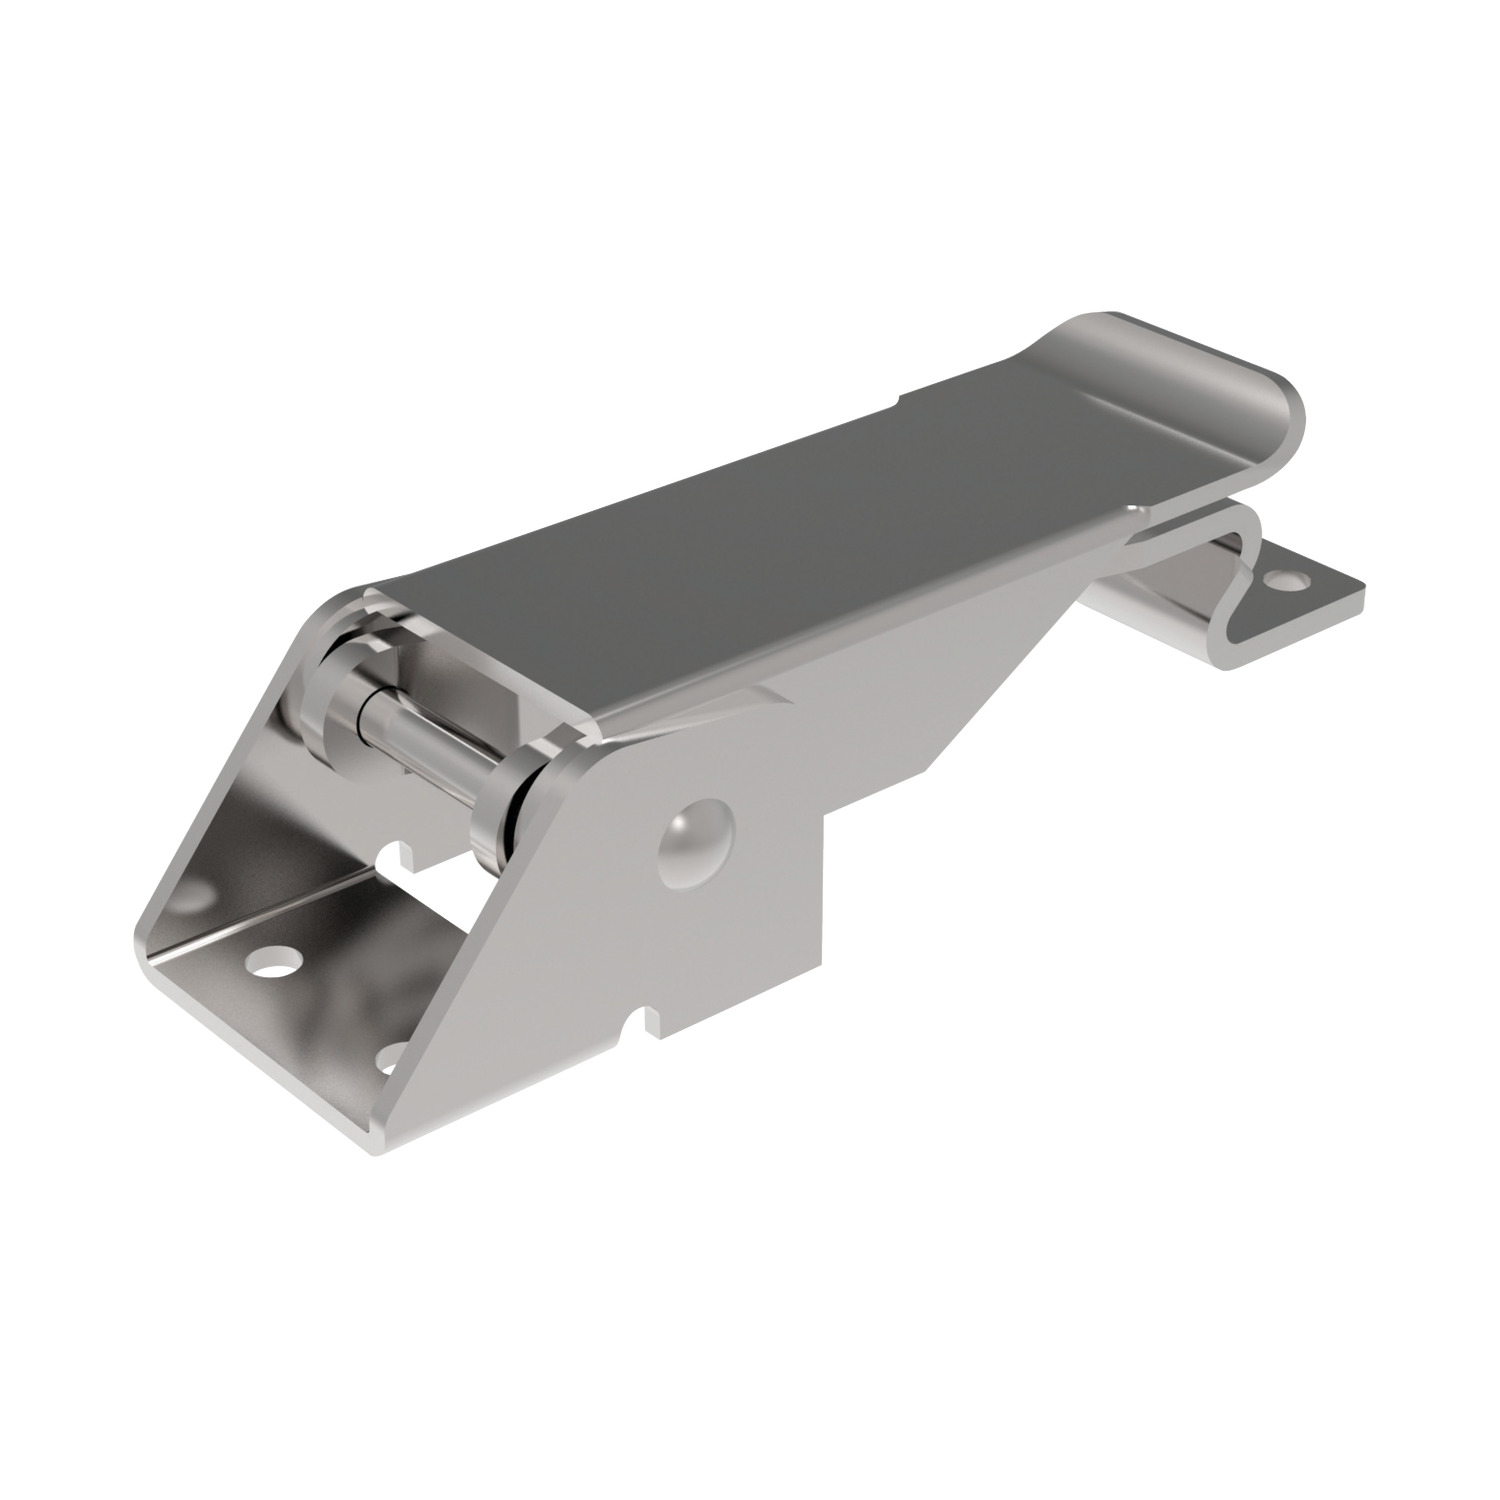 Toggle Latches Adjustable type toggle latch made from nickel plated steel and supplied with counter strike.